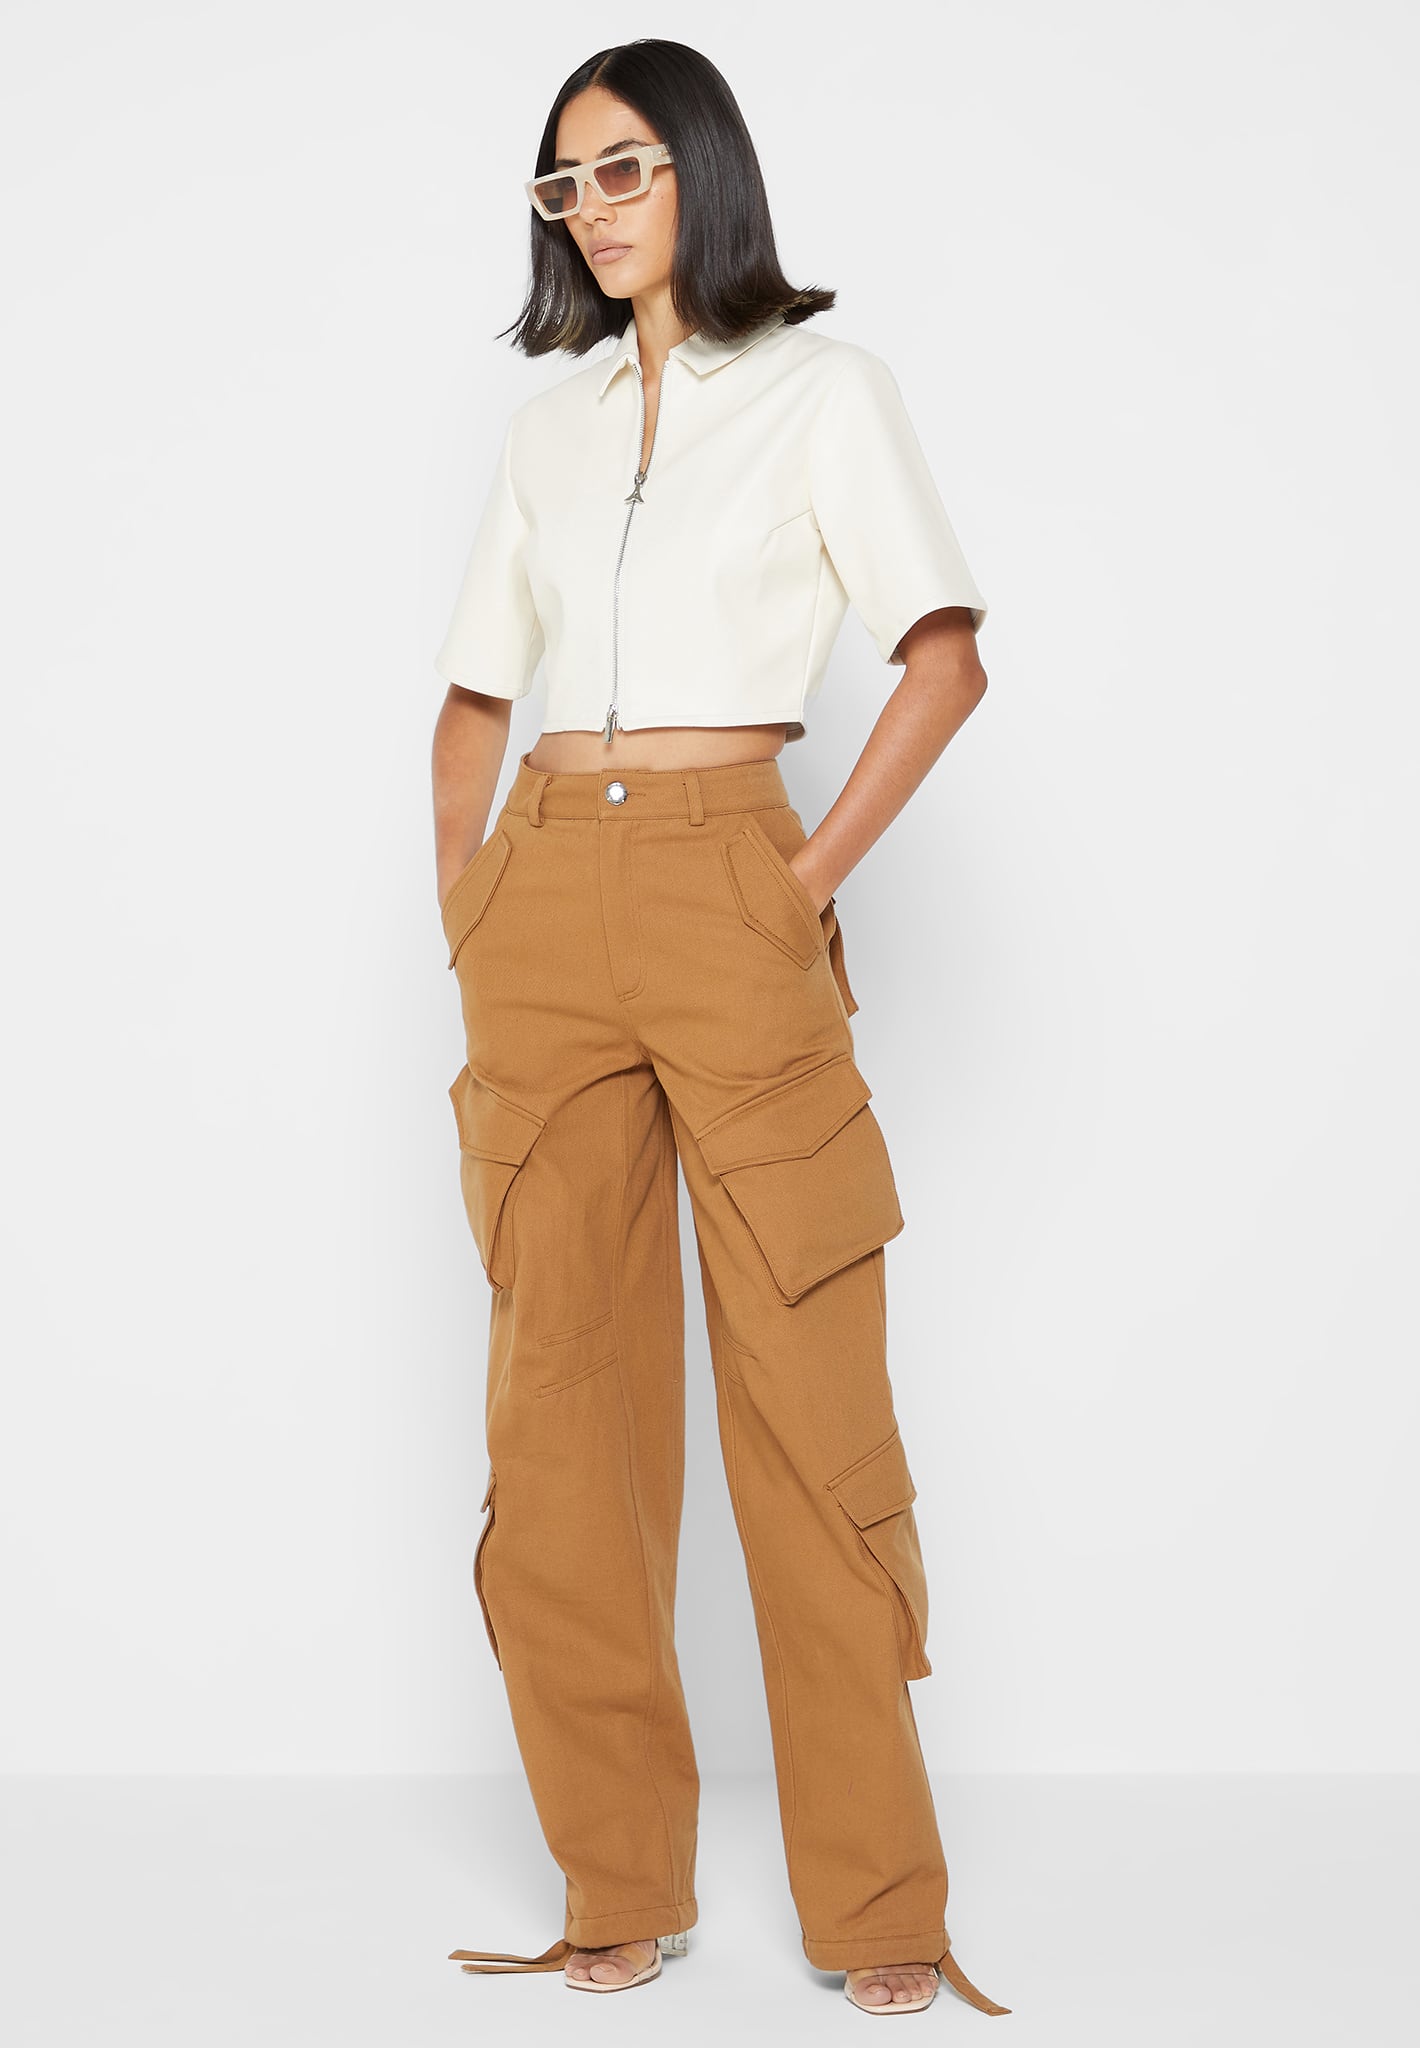 MARGAUX CARGAUX, Women's Pants with Hidden Pockets